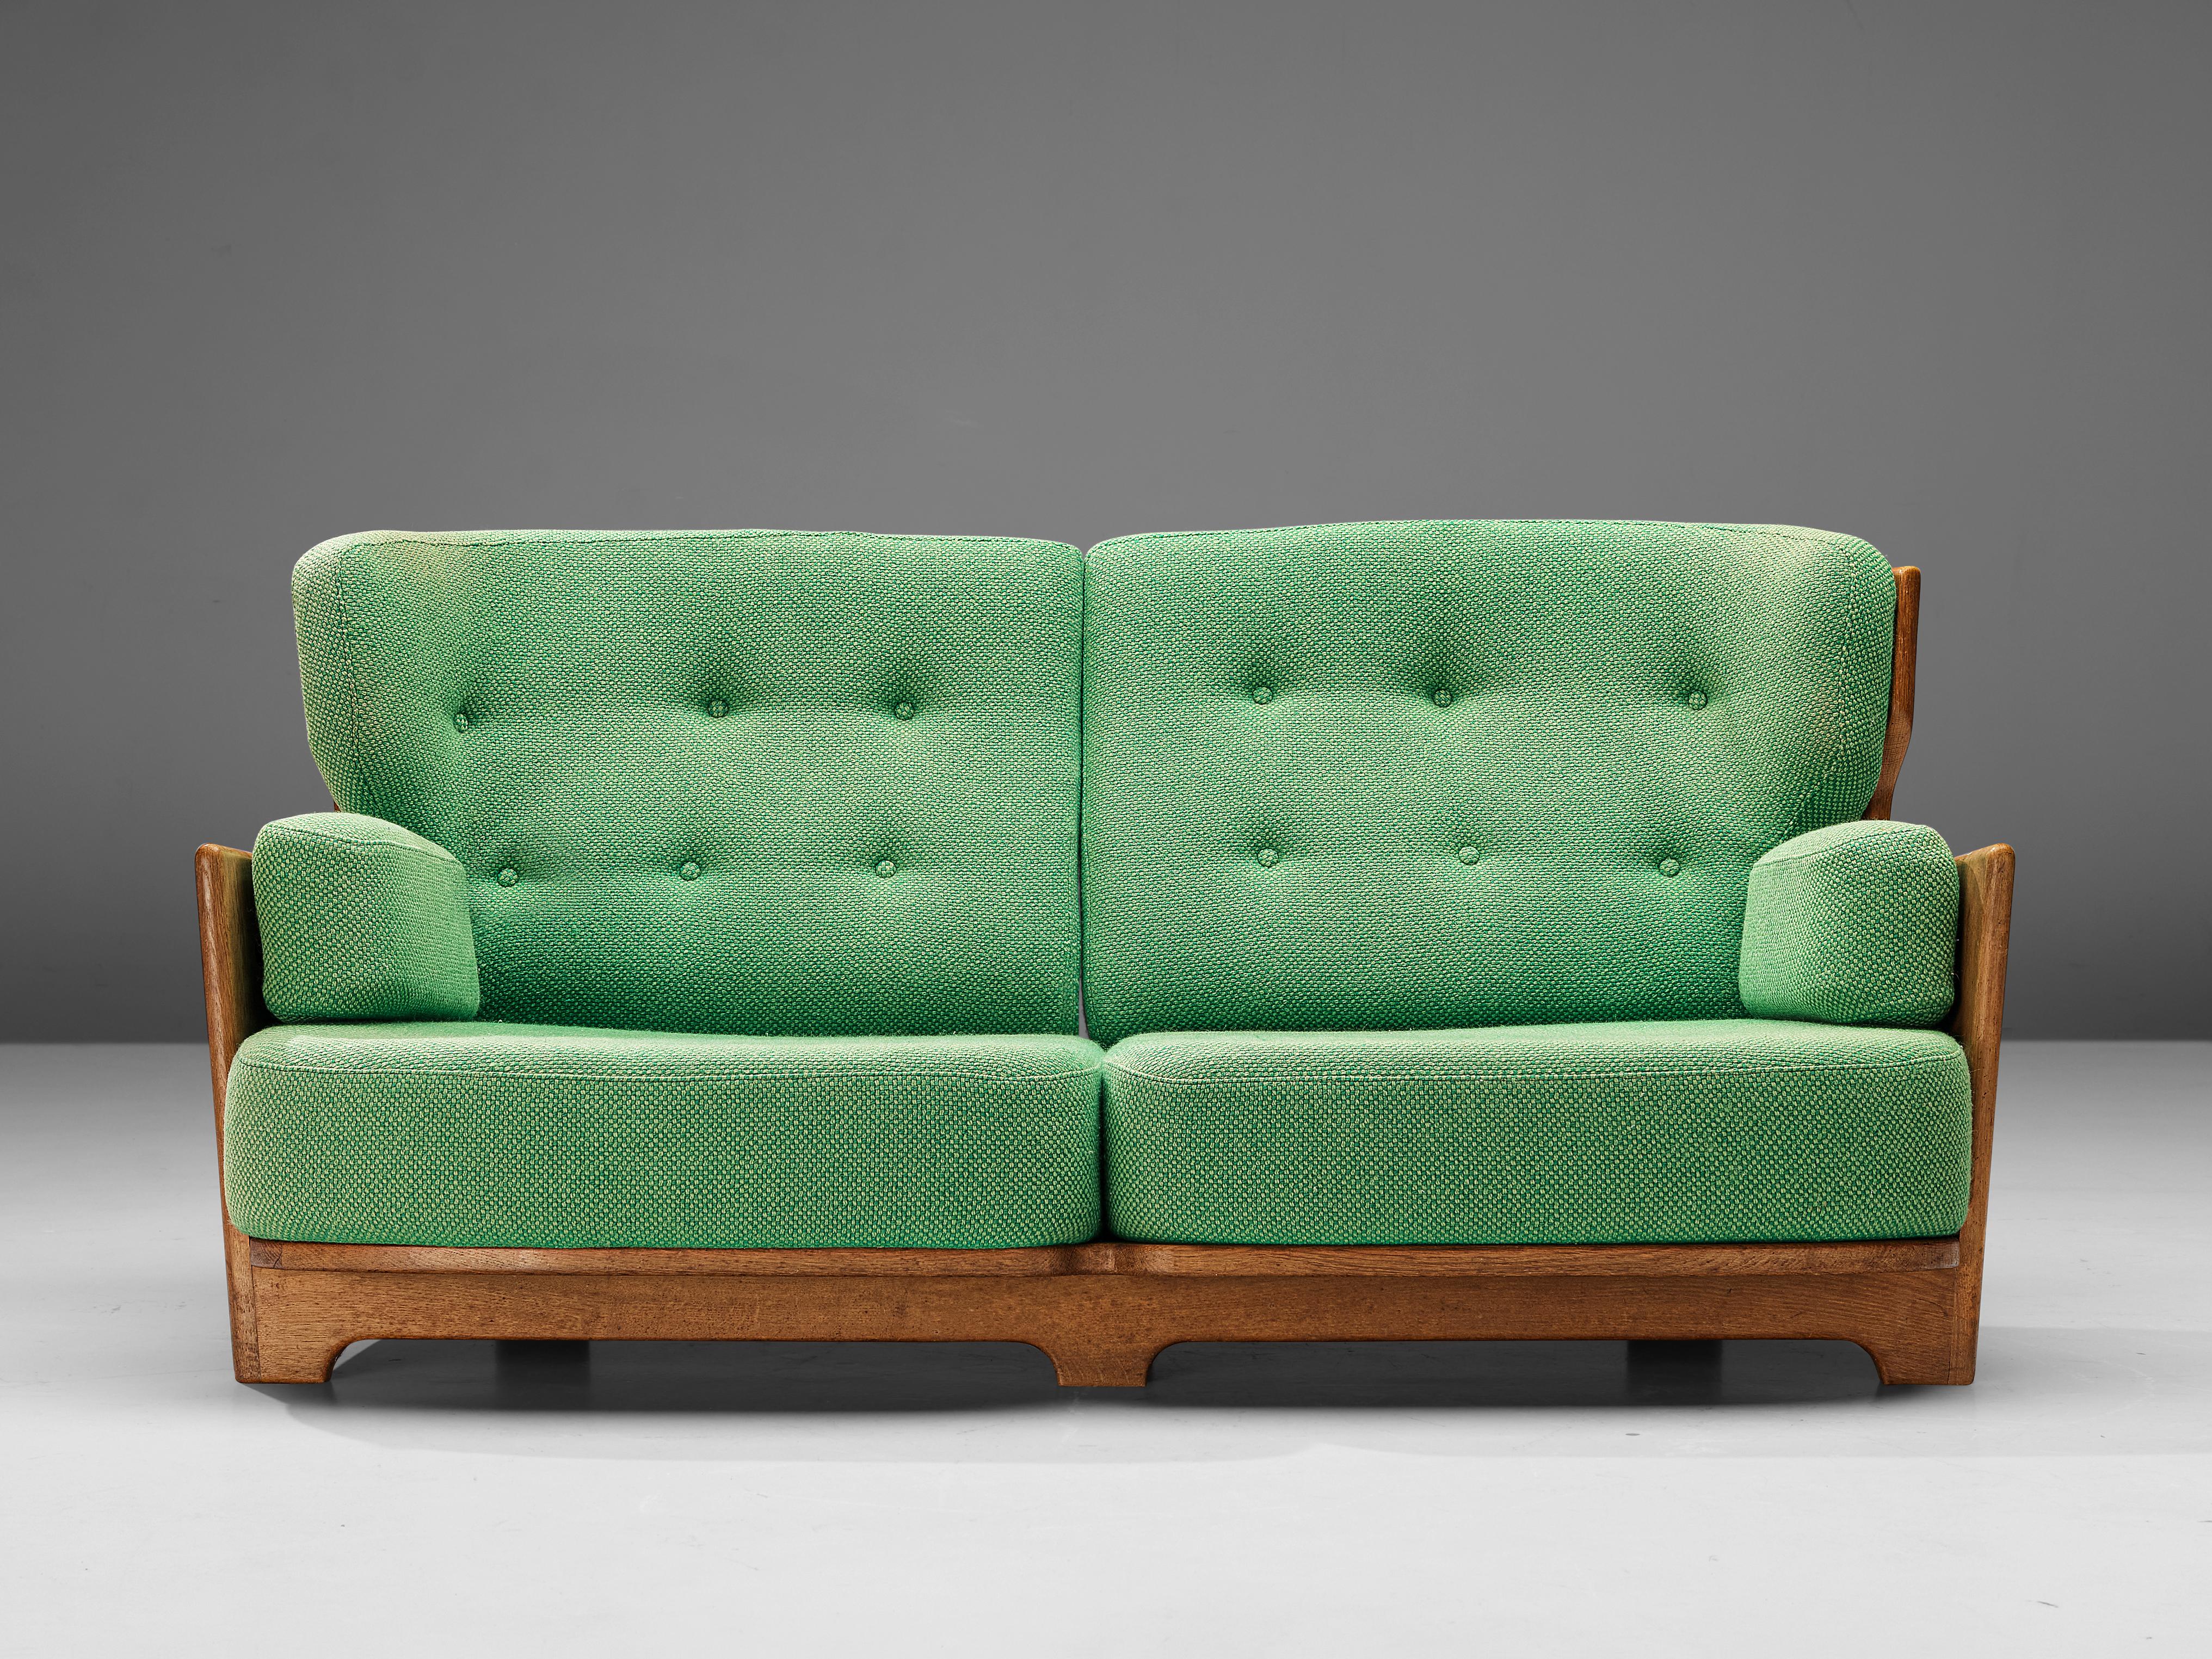 Guillerme & Chambron for Votre Maison, sofa, model 'Denis', fabric, oak, France, 1960s

Extraordinary Guillerme and Chambron sofa in solid oak with the typical characteristic decorative details at the back and capricious forms of the legs. This